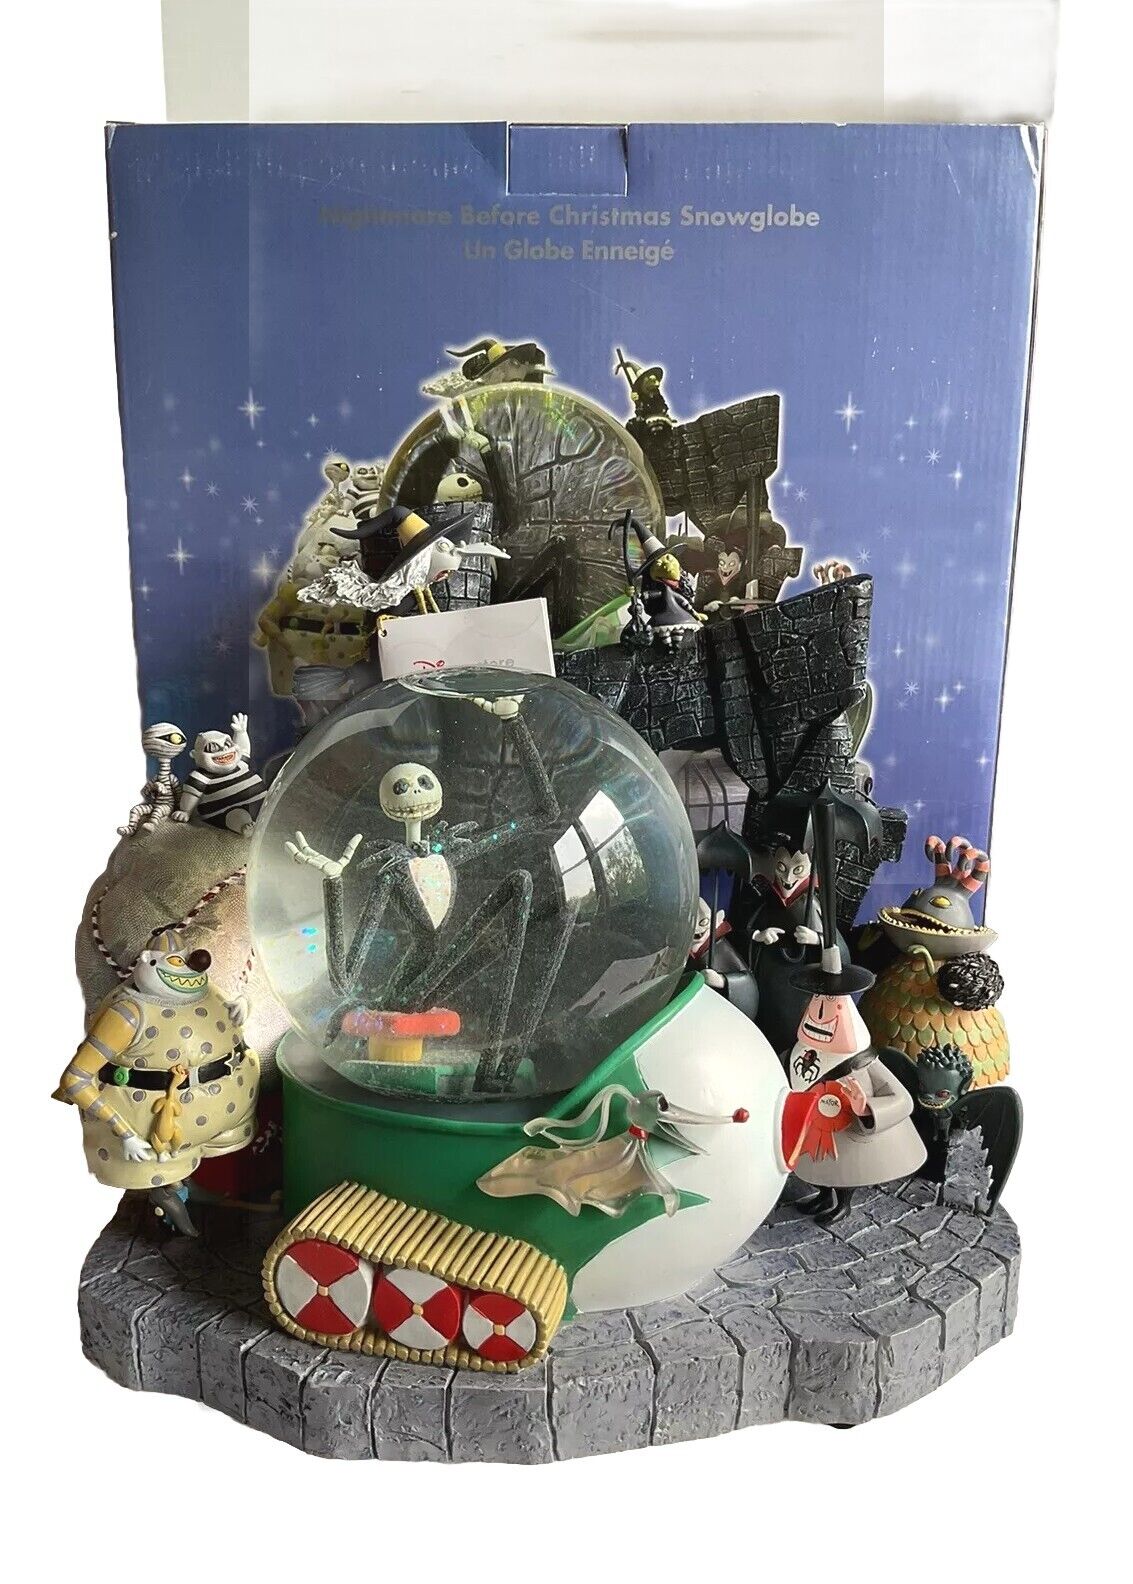 Nightmare Before Christmas Snowglobe Disney Store 1993 Vintage Collectible 